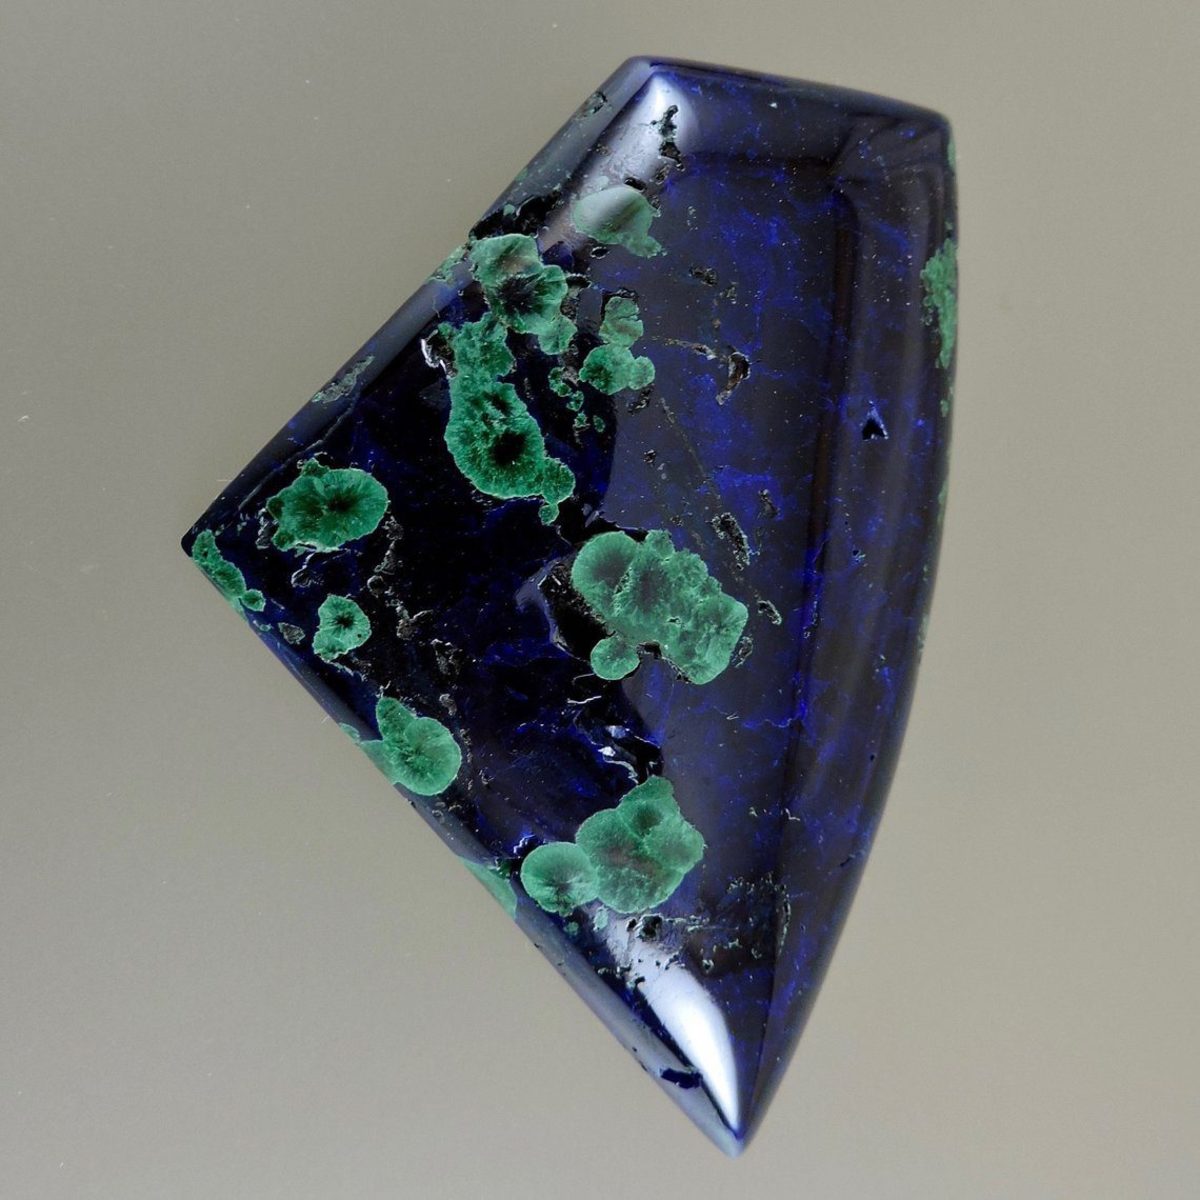 Facts About Azurite-Description, Properties, and Uses